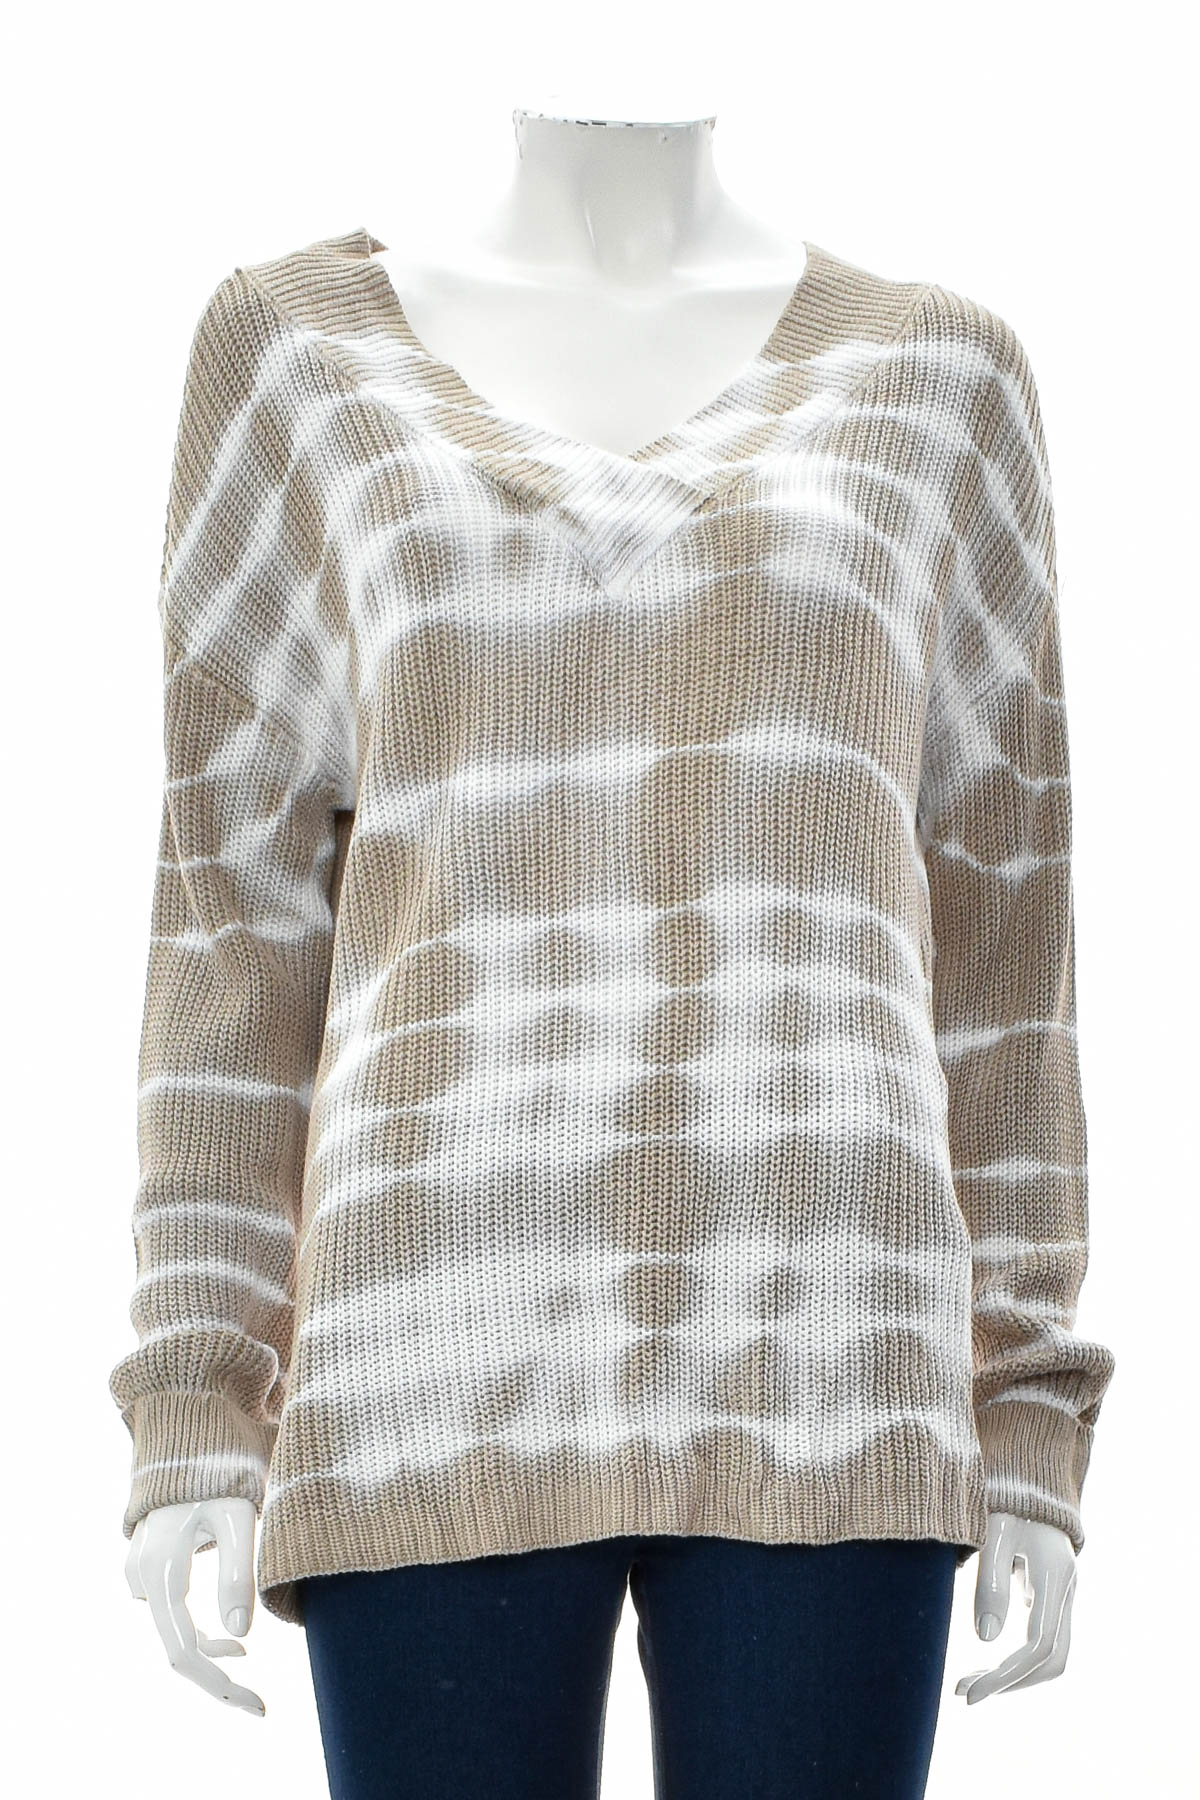 Women's sweater - New Directions - 0